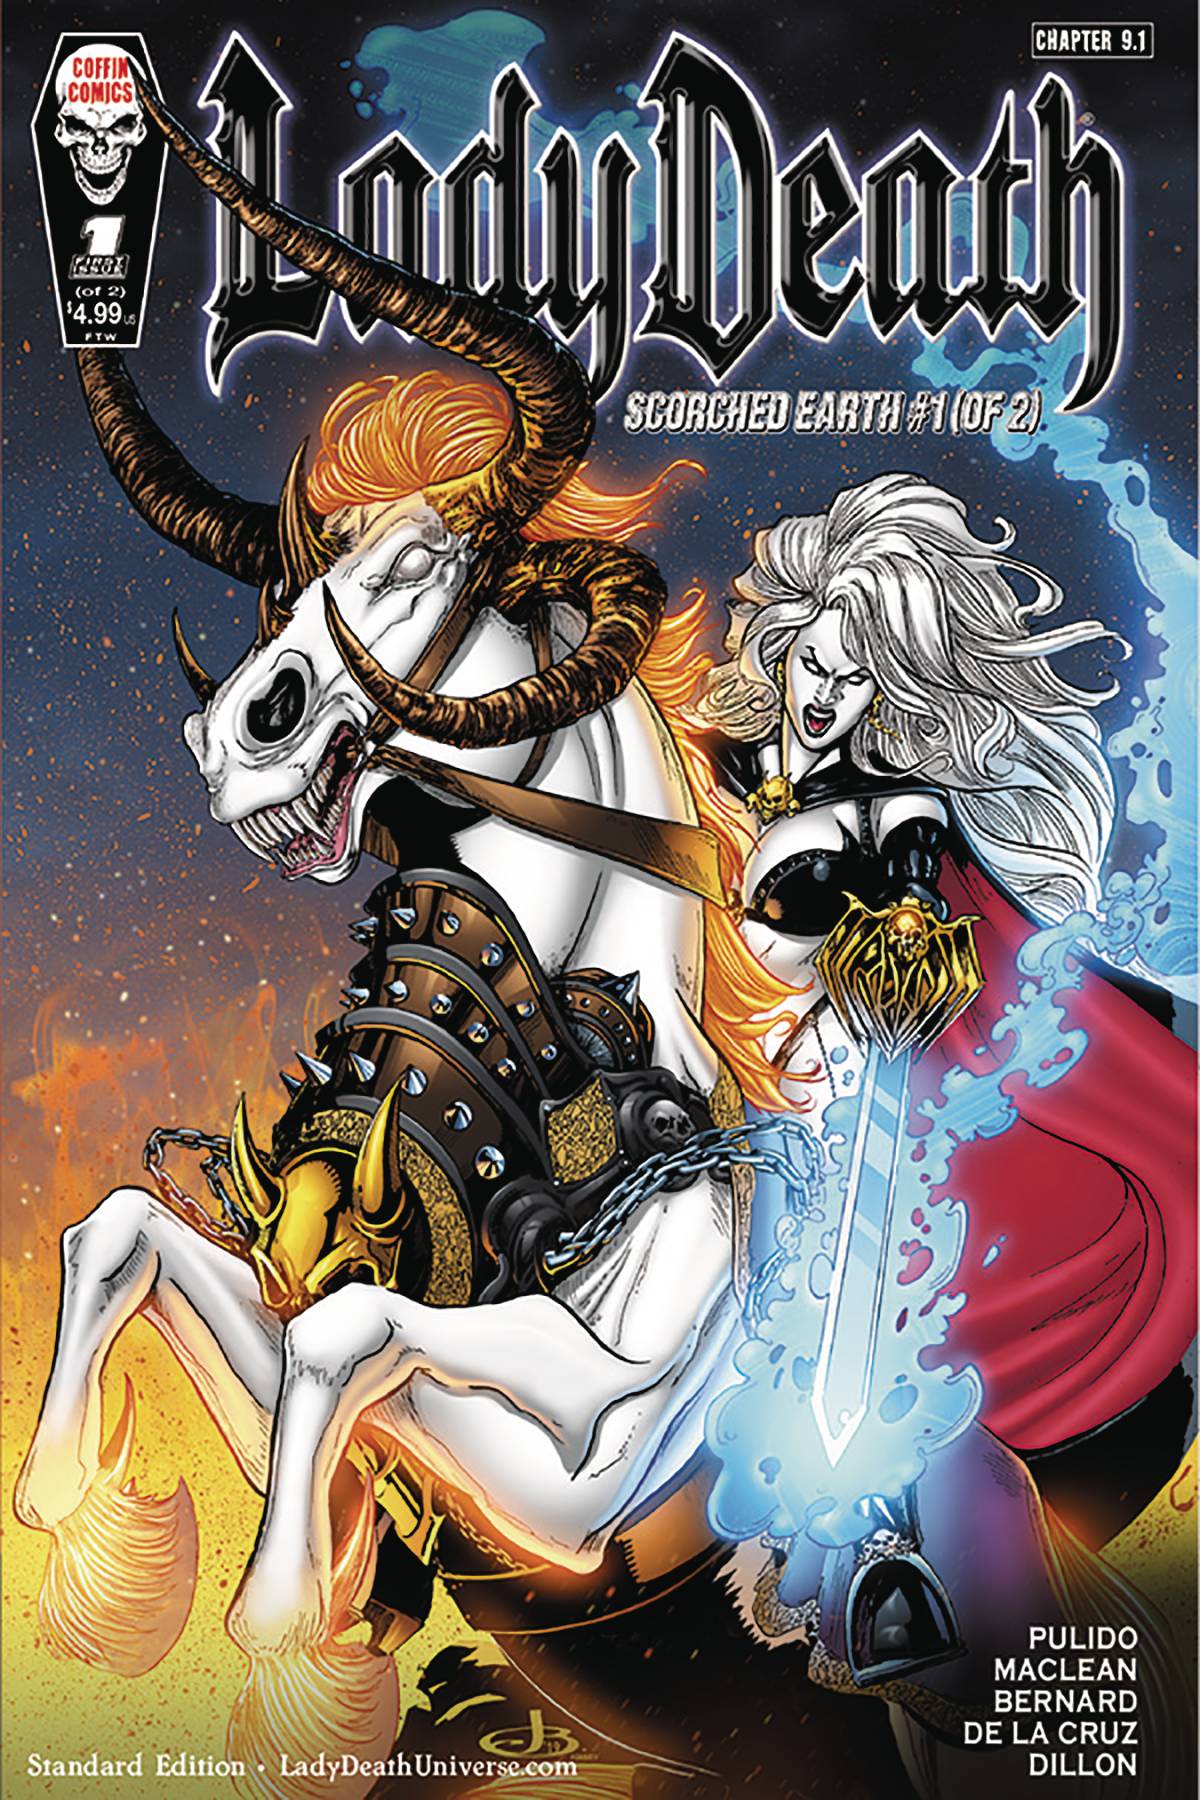 Lady Death: Scorched Earth #1 (2020)